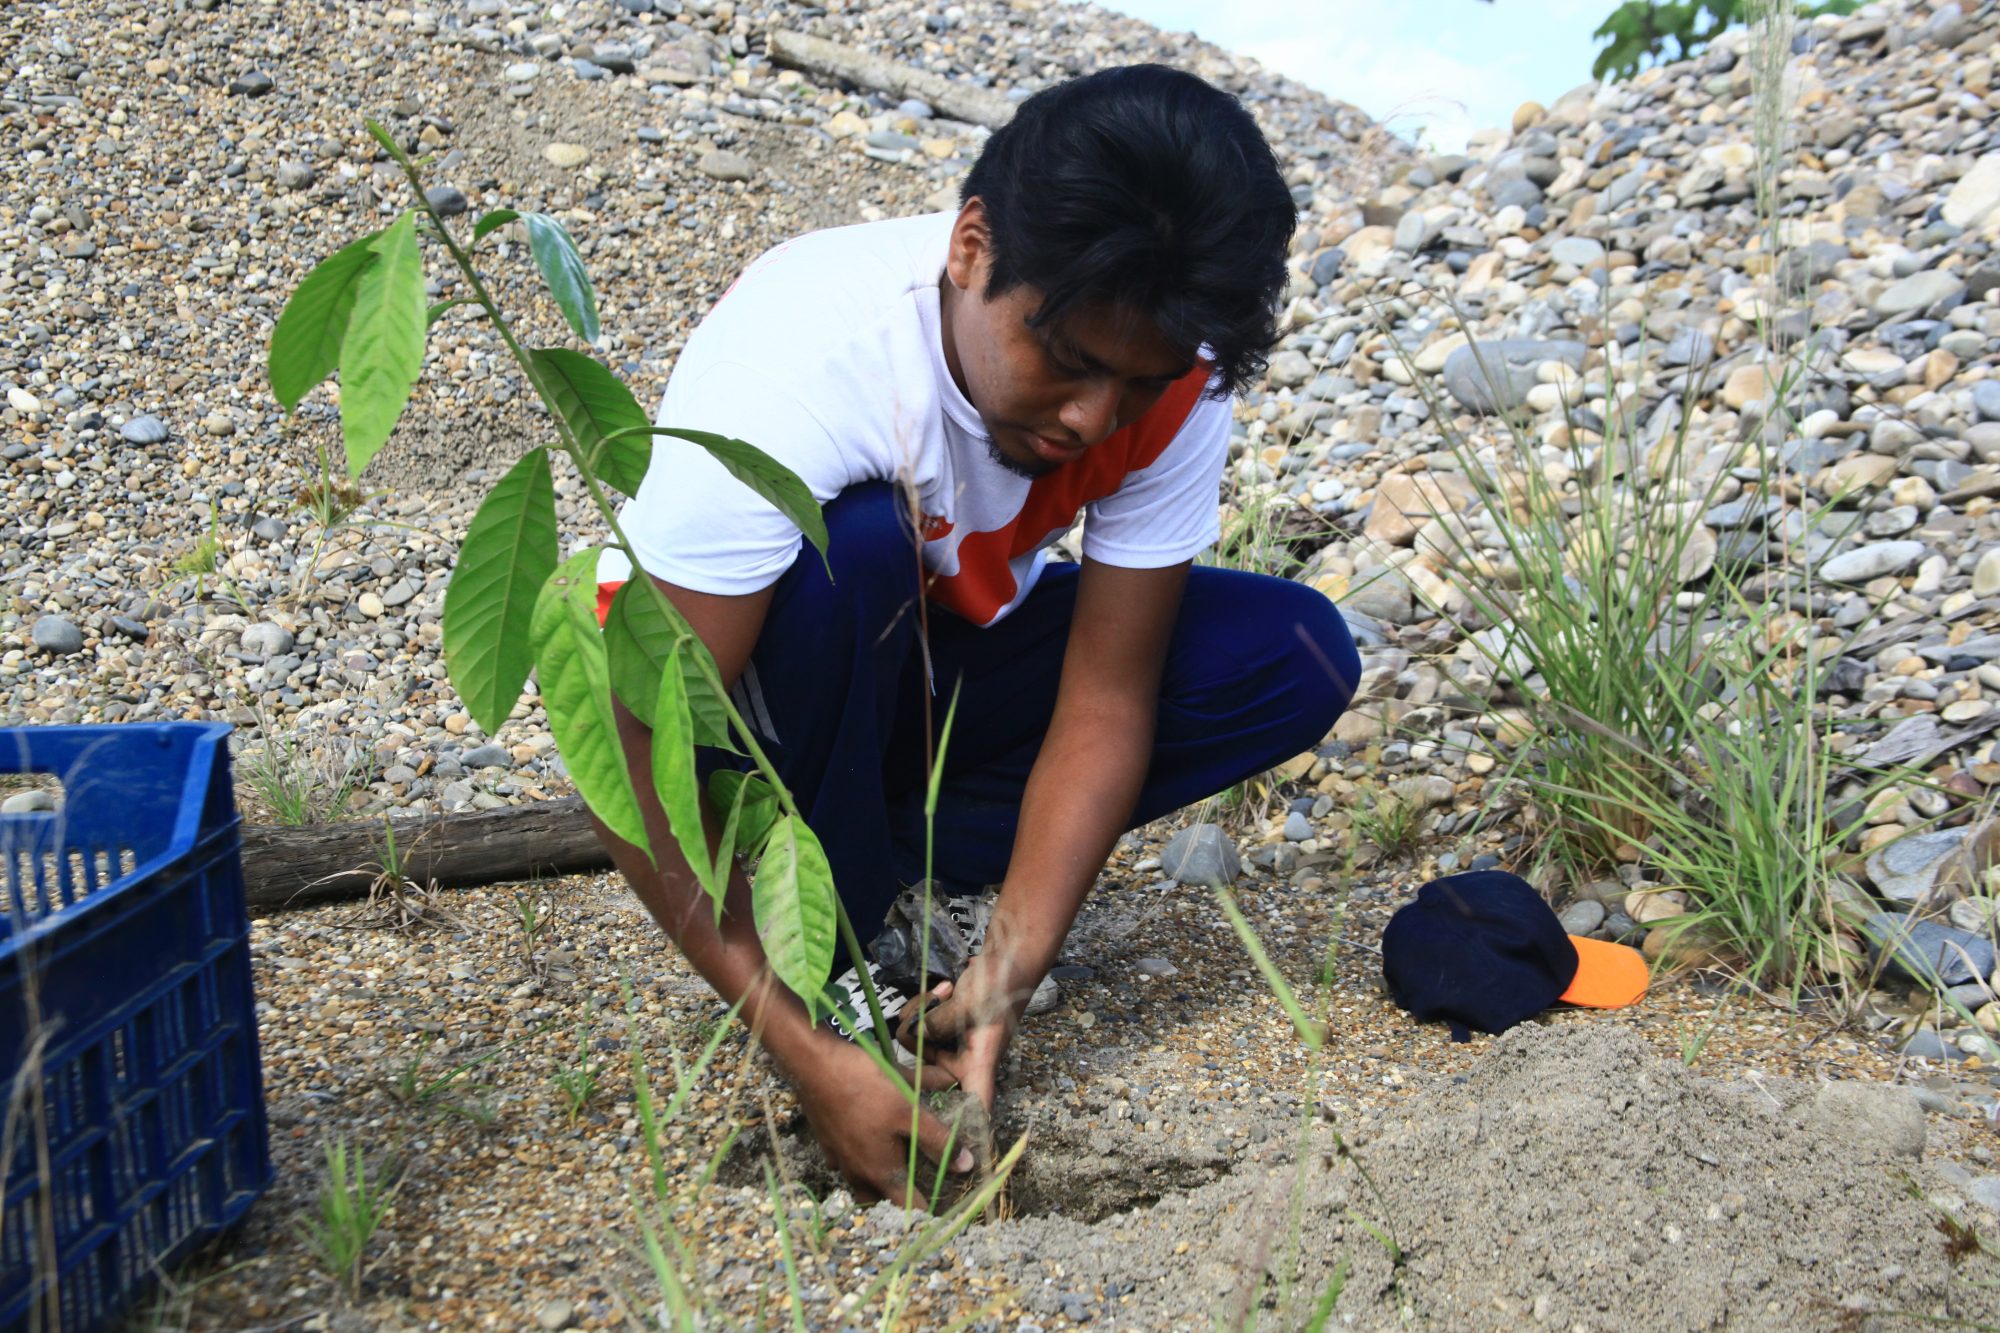 Rainforest reforestation - A Pure Earth/CINCIA A team member planting a seedling in the degraded Fortuna Milagritos site in November 2018.